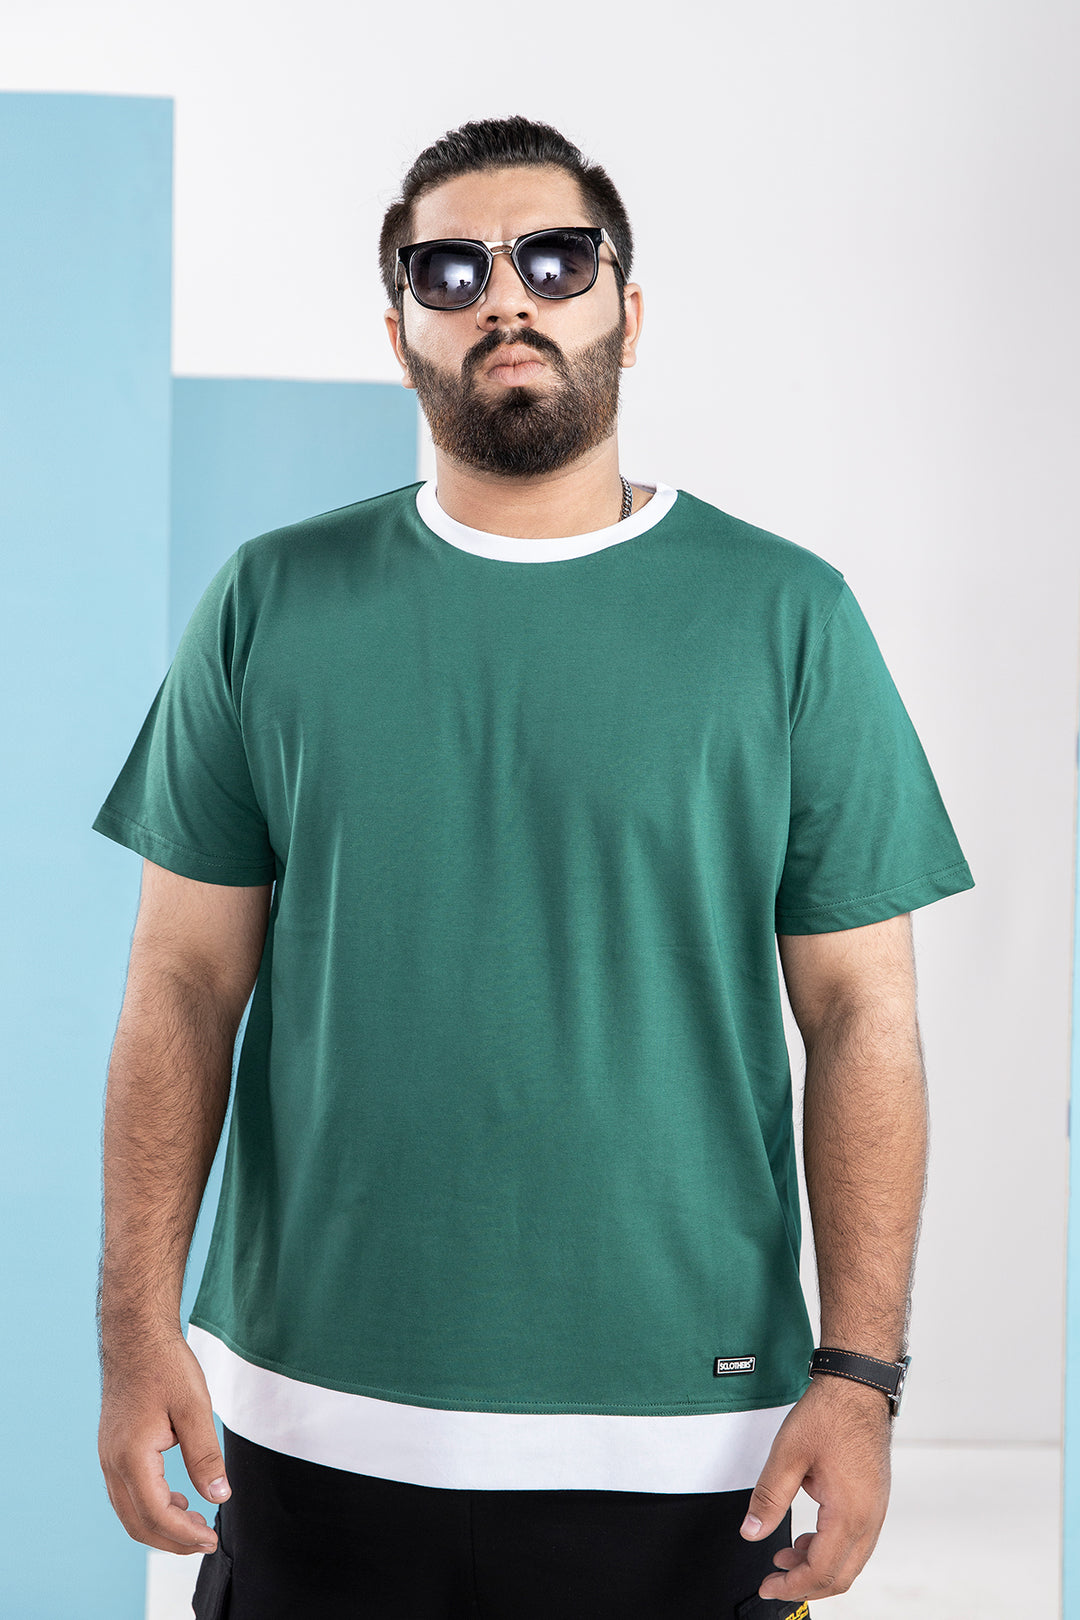 Green Pastures Ribbed T-Shirt (Plus Size) - S21 - MT0064P